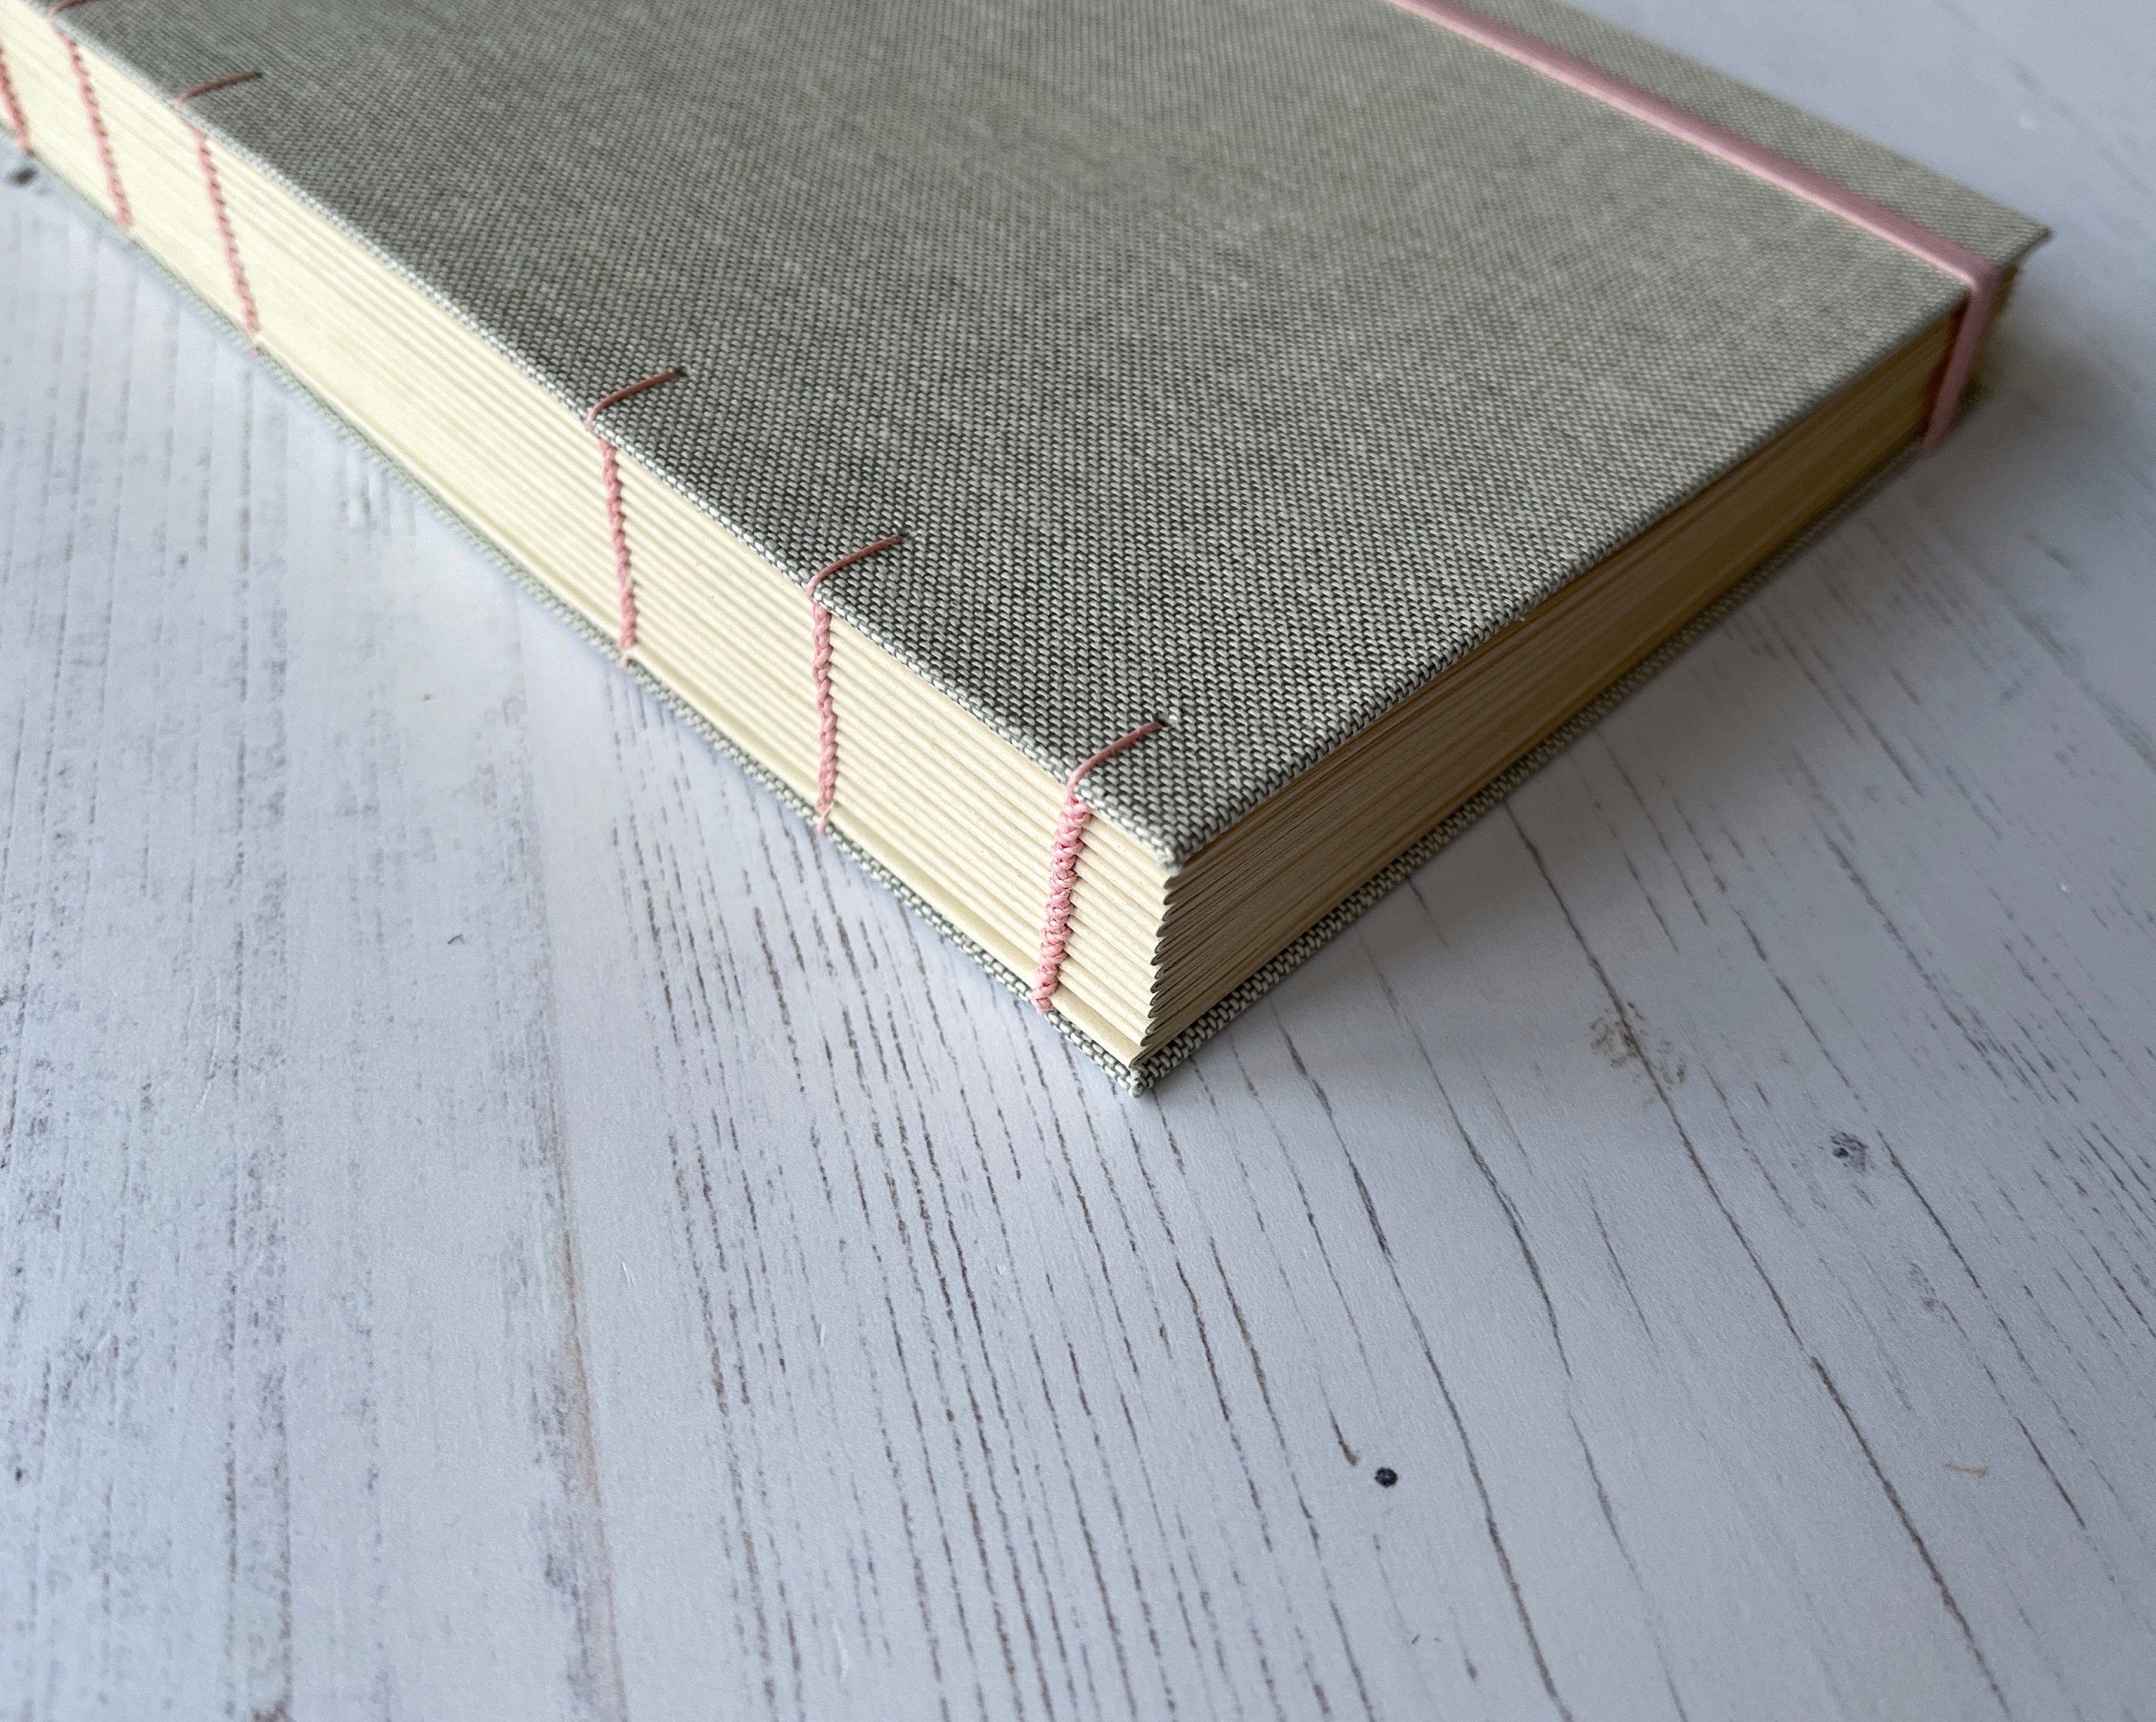 2024 Pre-made Bullet Dotted Journal Coil Spiral Bound With No Bleed Through  Pages Dot Grid Notebook Premade Aesthetic Dotted Planner 